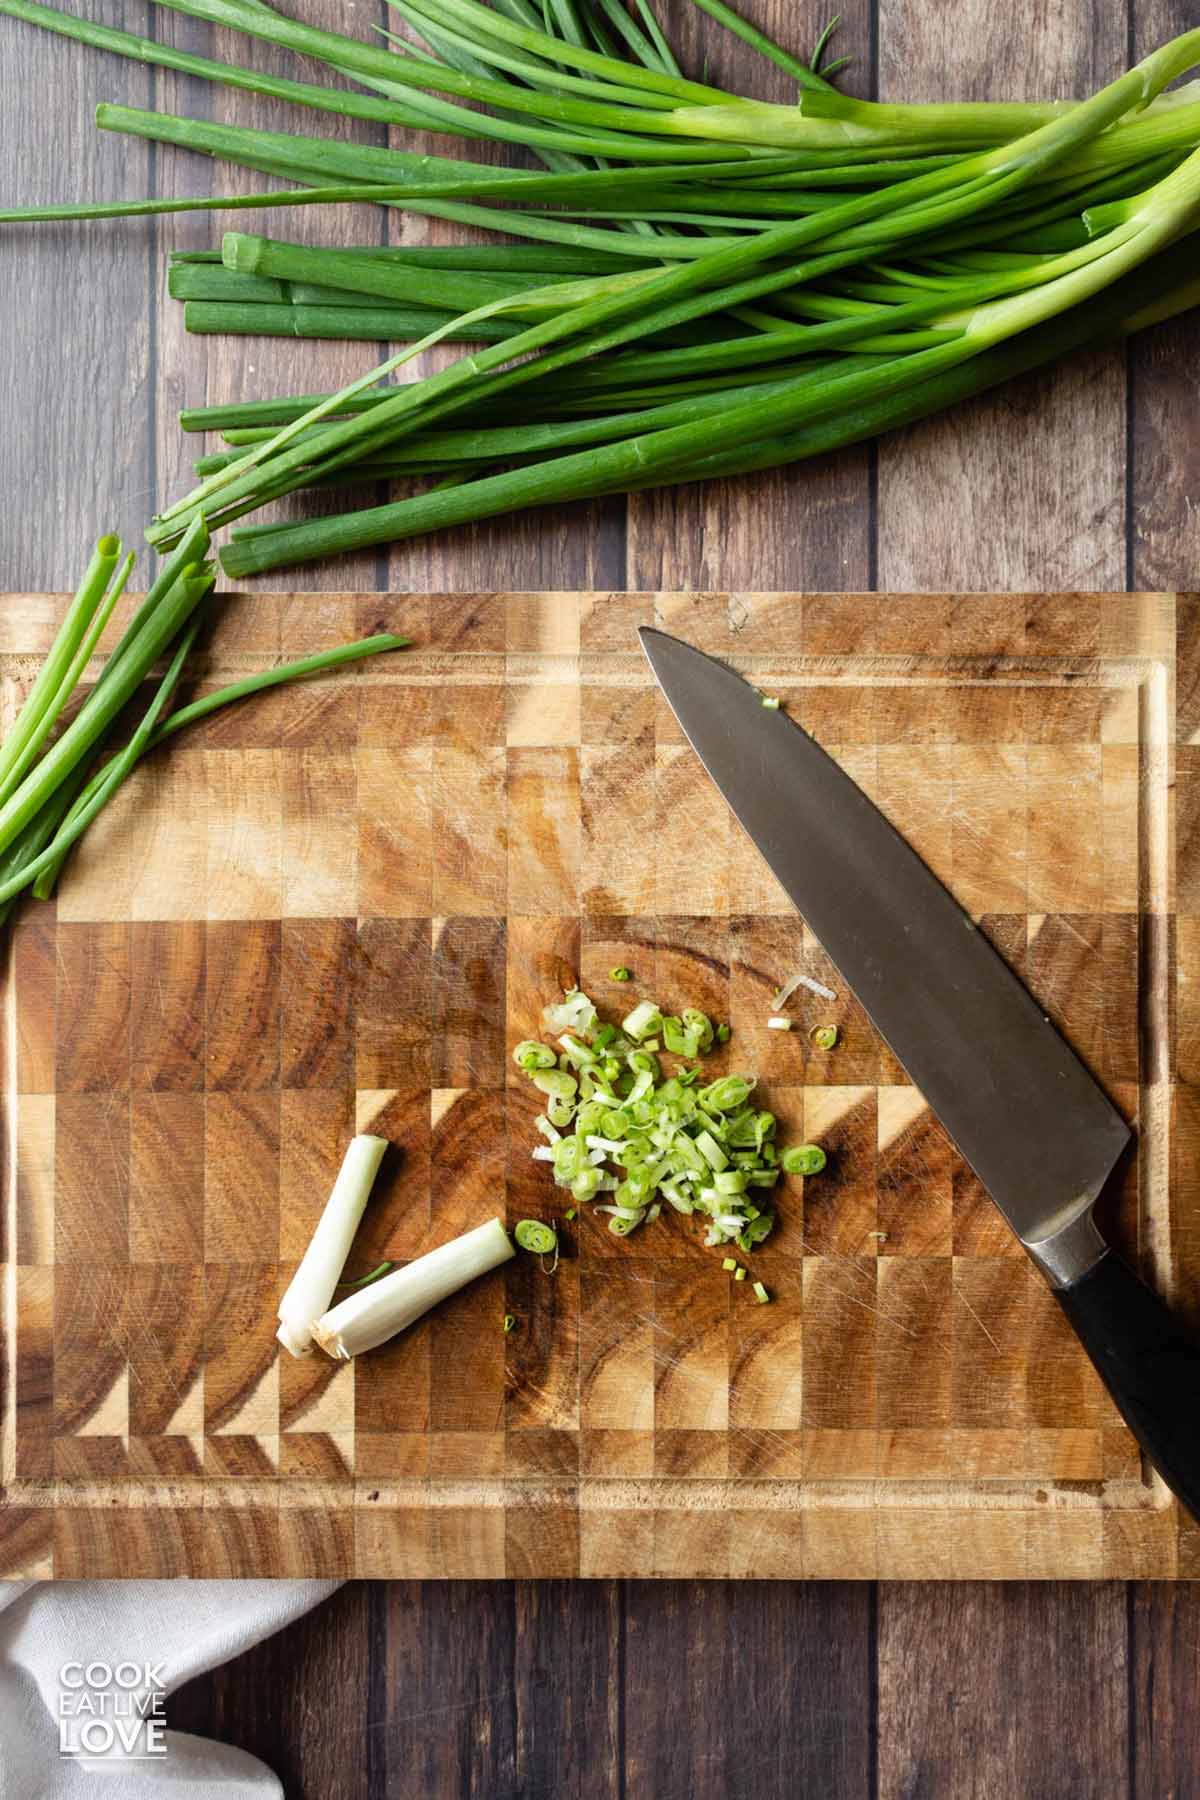 Minced green onions on the cutting board.